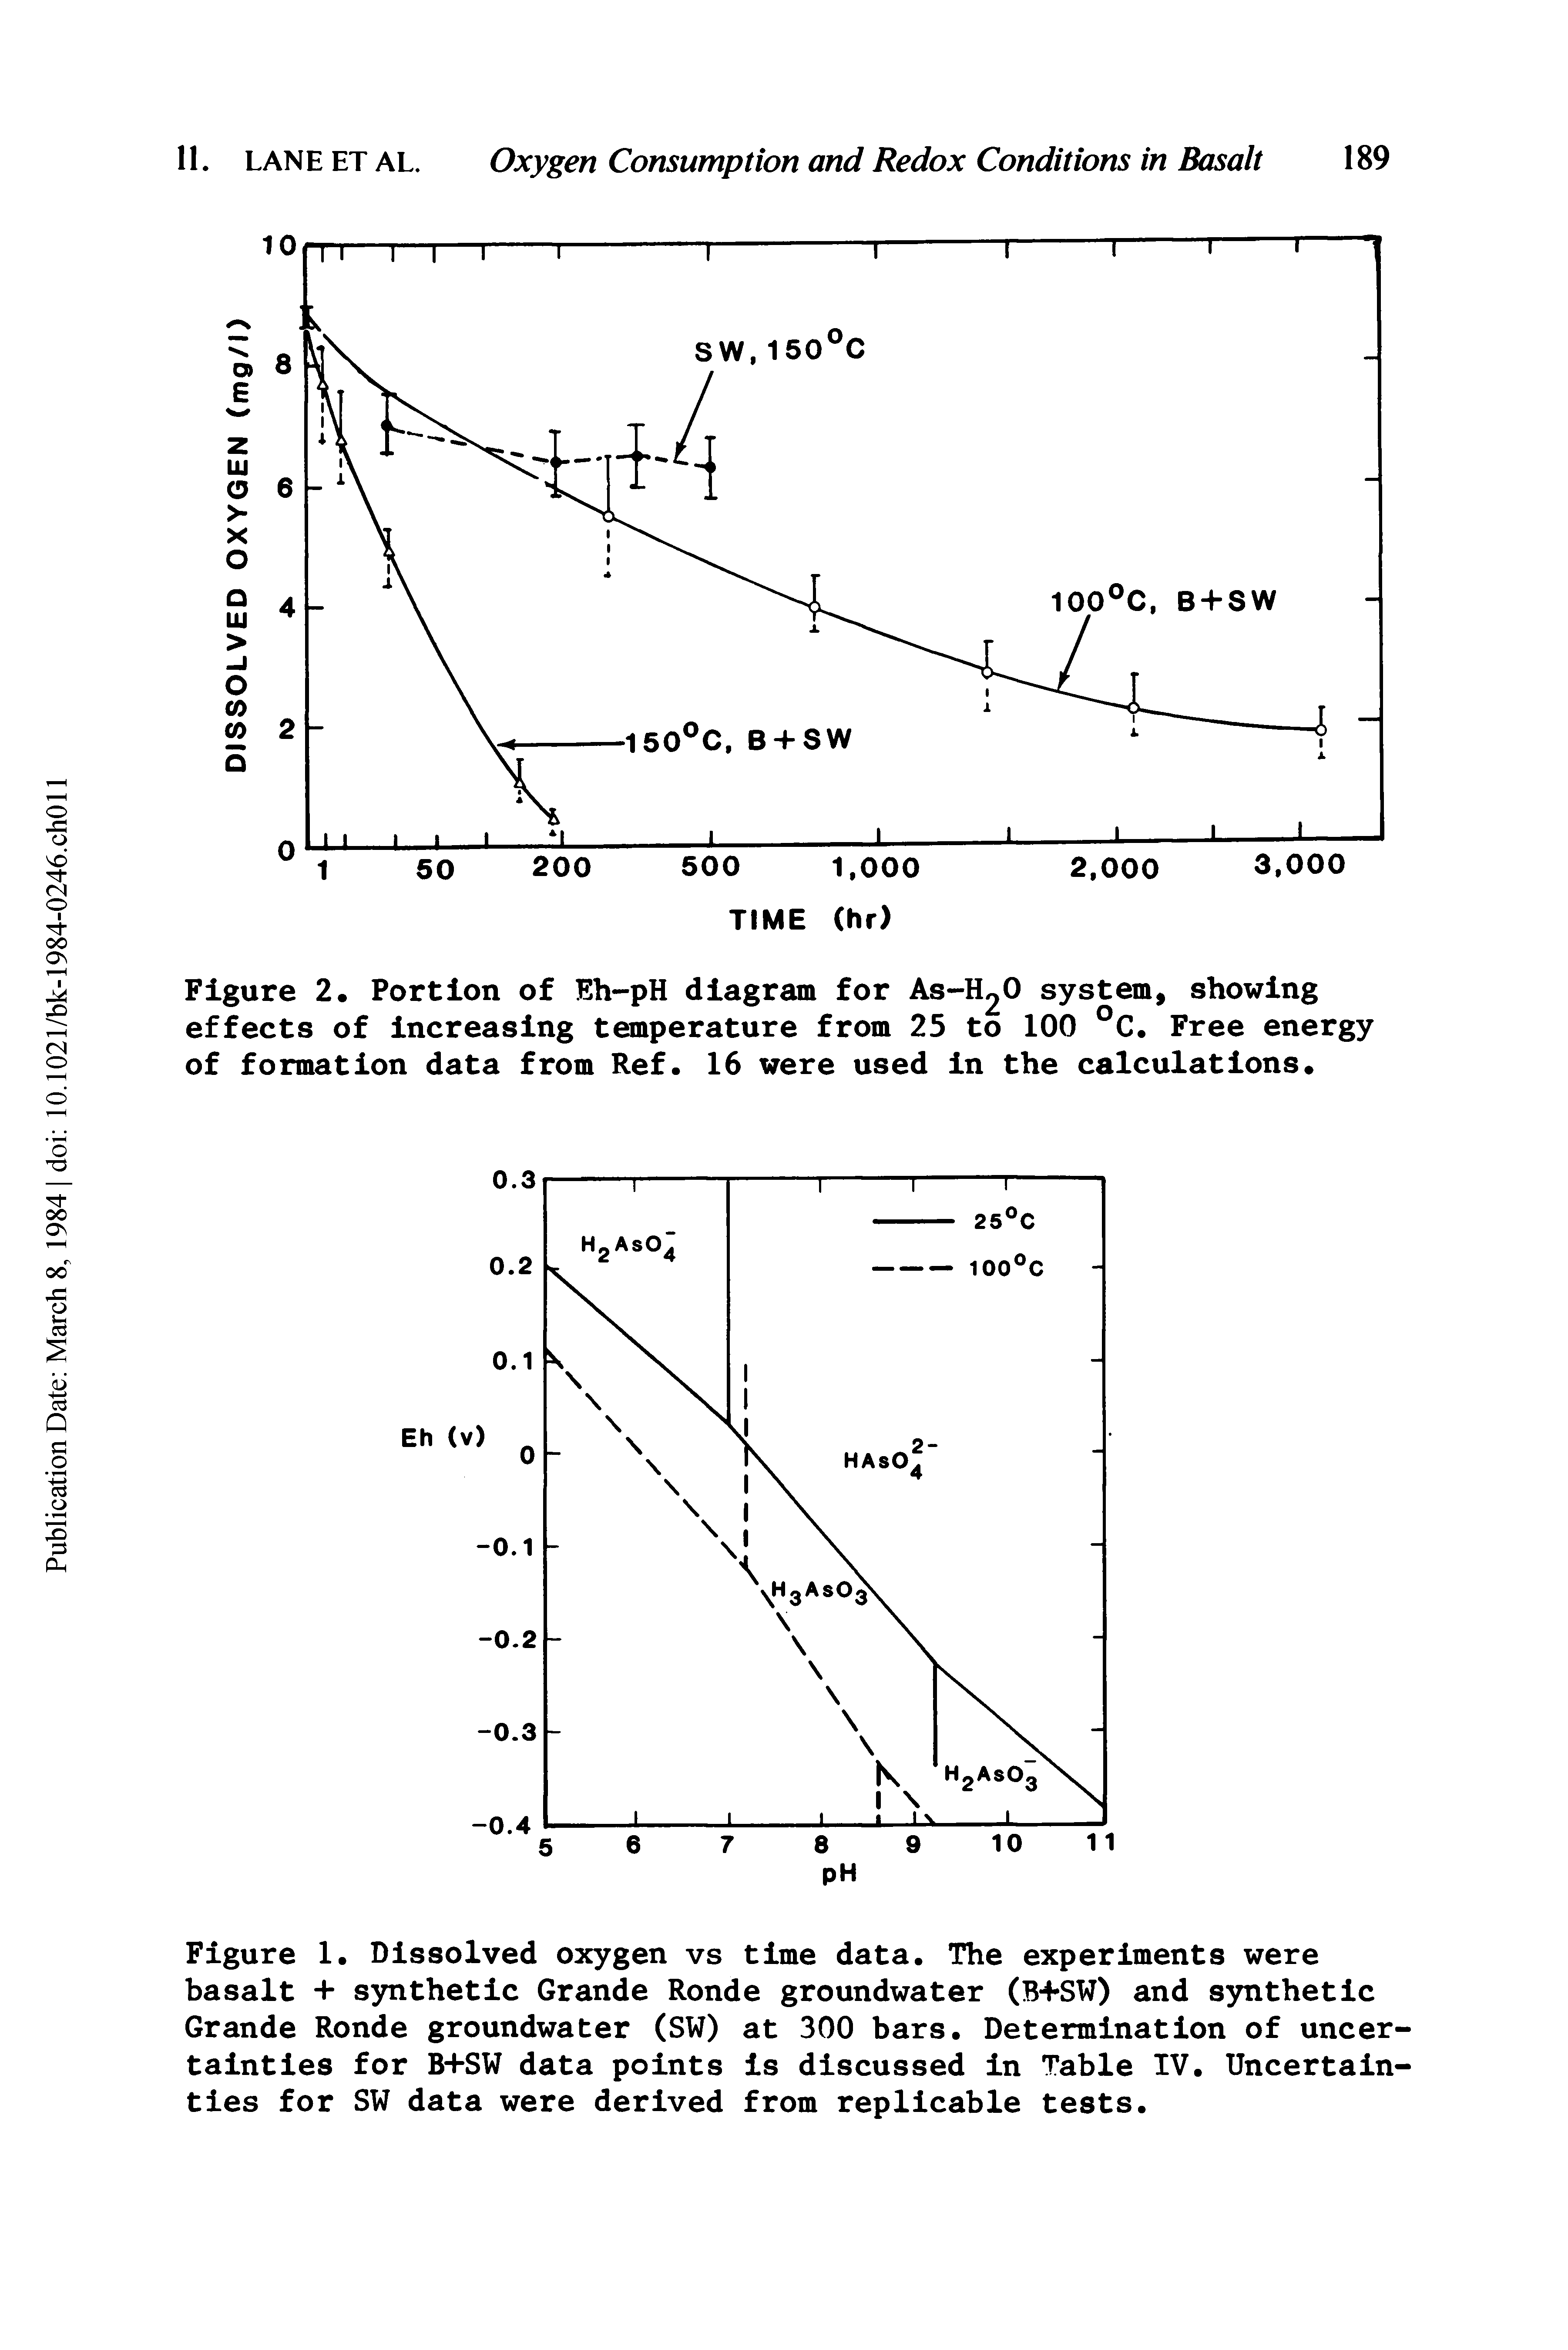 Figure 1. Dissolved oxygen vs time data. The experiments were basalt + synthetic Grande Ronde groundwater (B+SW) and synthetic Grande Ronde groundwater (SW) at 300 bars. Determination of uncertainties for B+SW data points is discussed in Table IV. Uncertainties for SW data were derived from replicable tests.